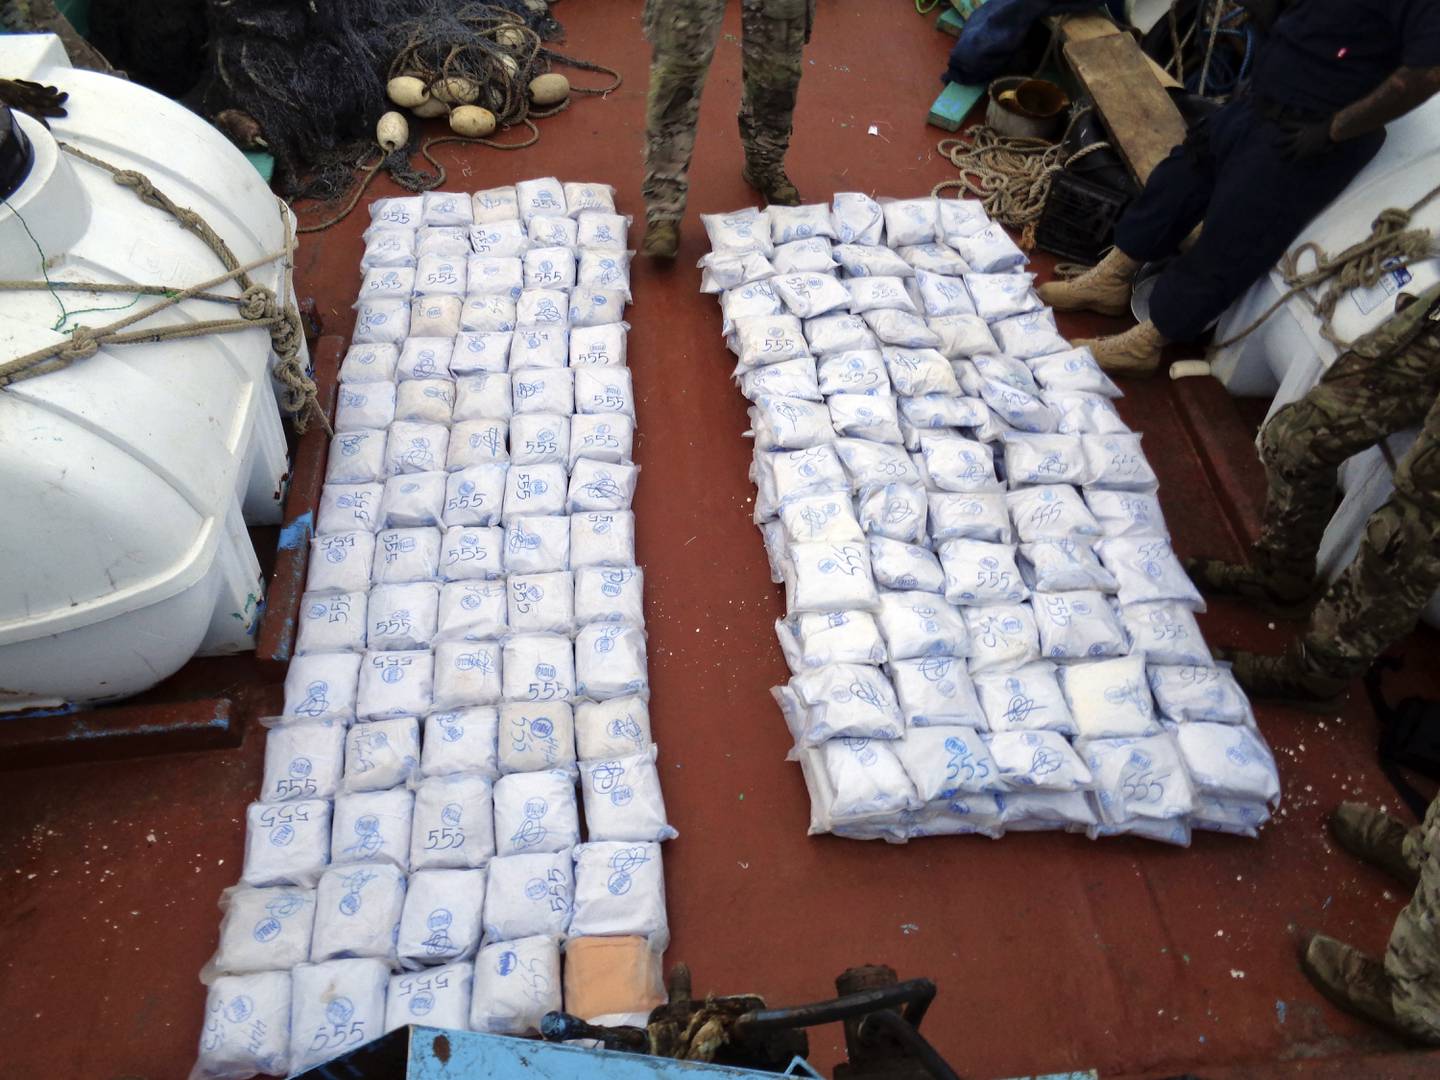 US Navy personnel from the USS Tempest and USS Typhoon gather the confiscated illegal drugs. AP